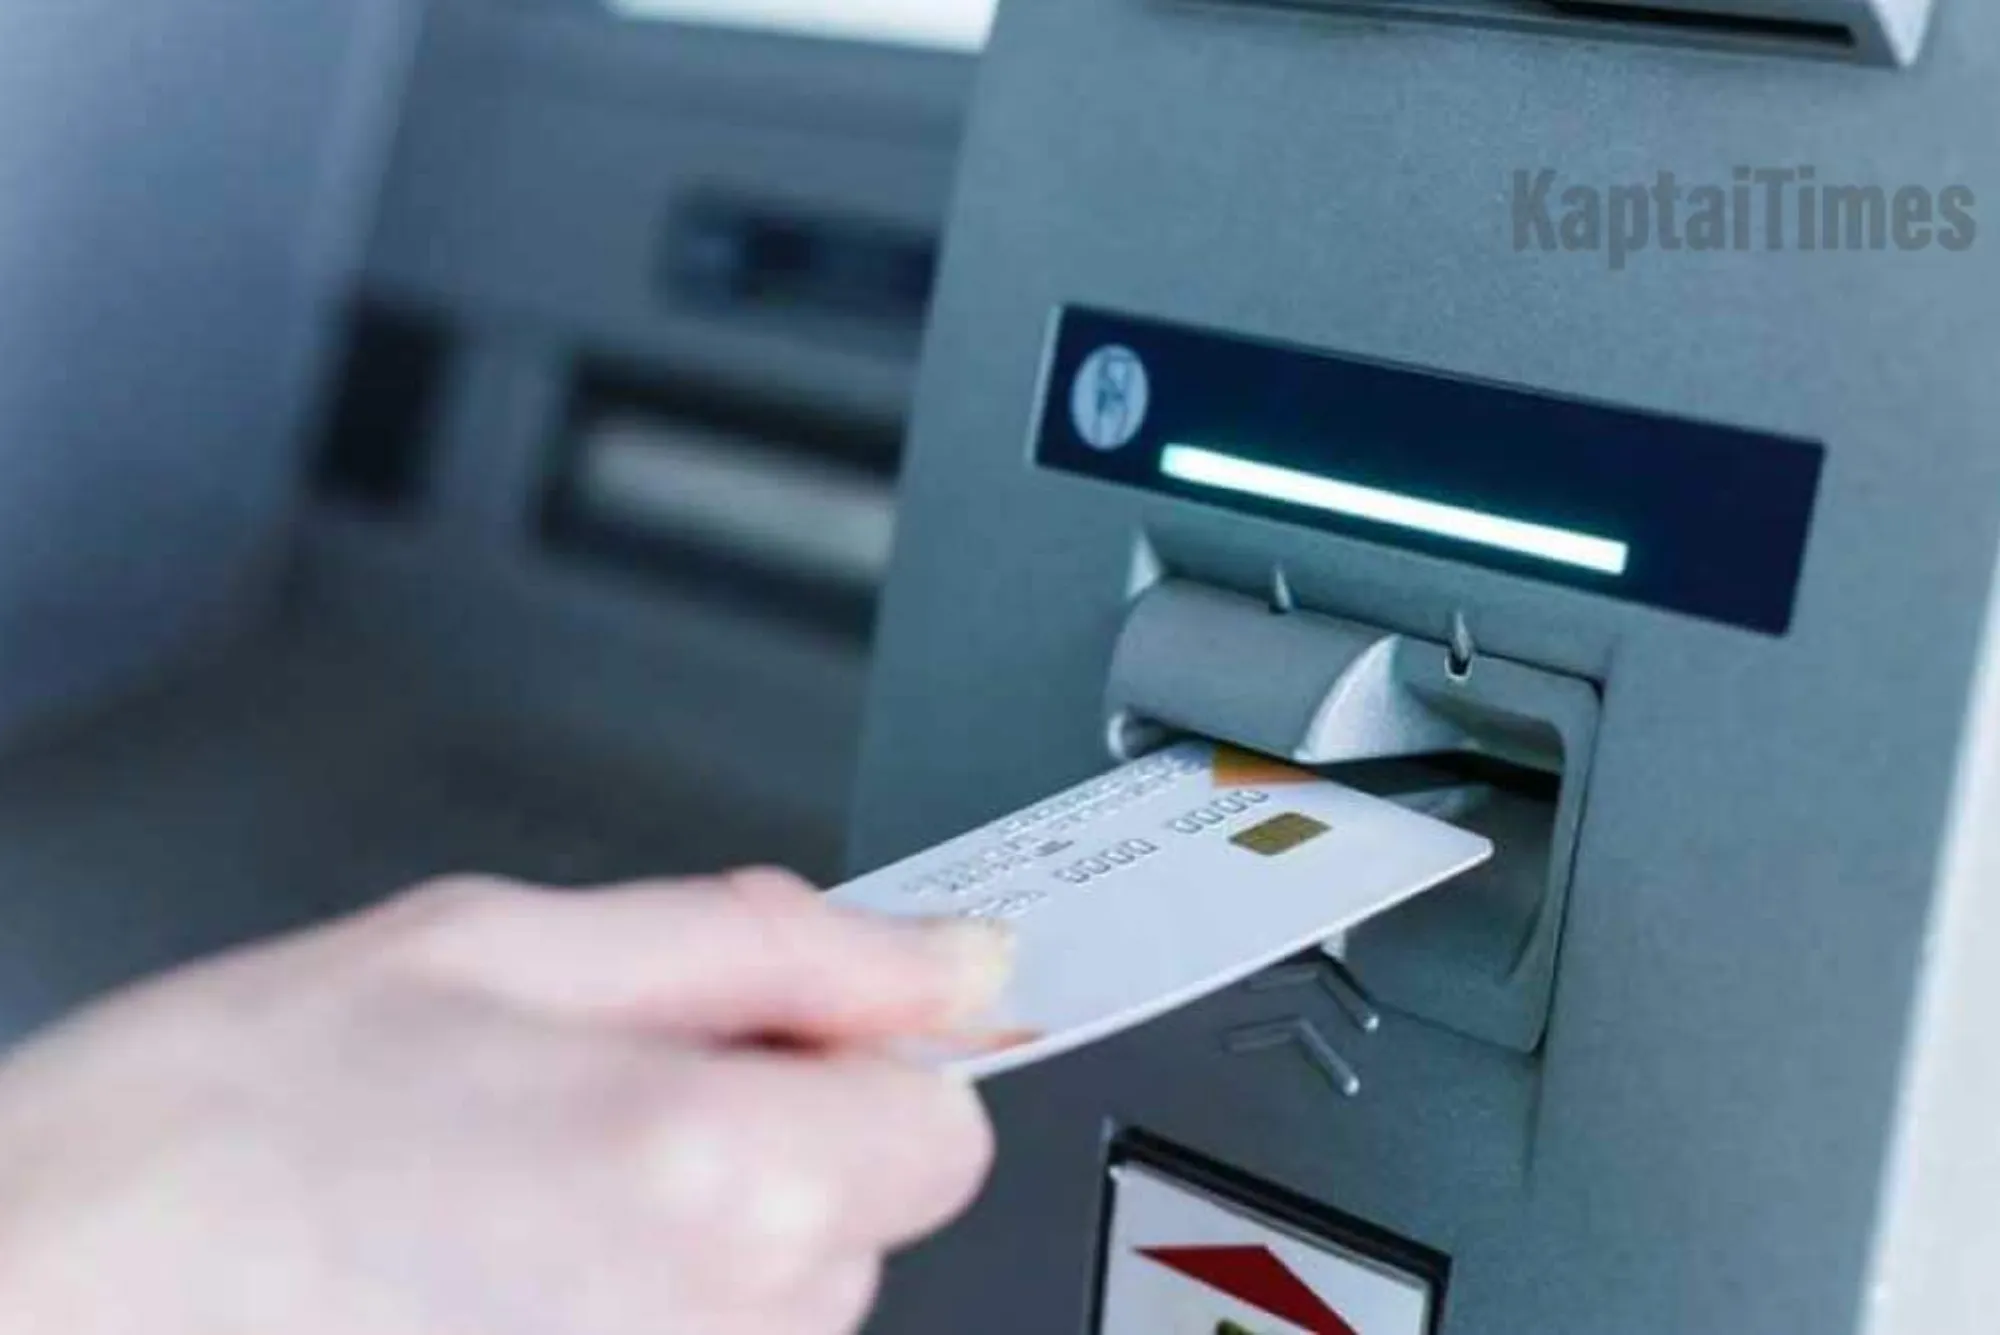 How To Use The Atm Card In Atm Machine